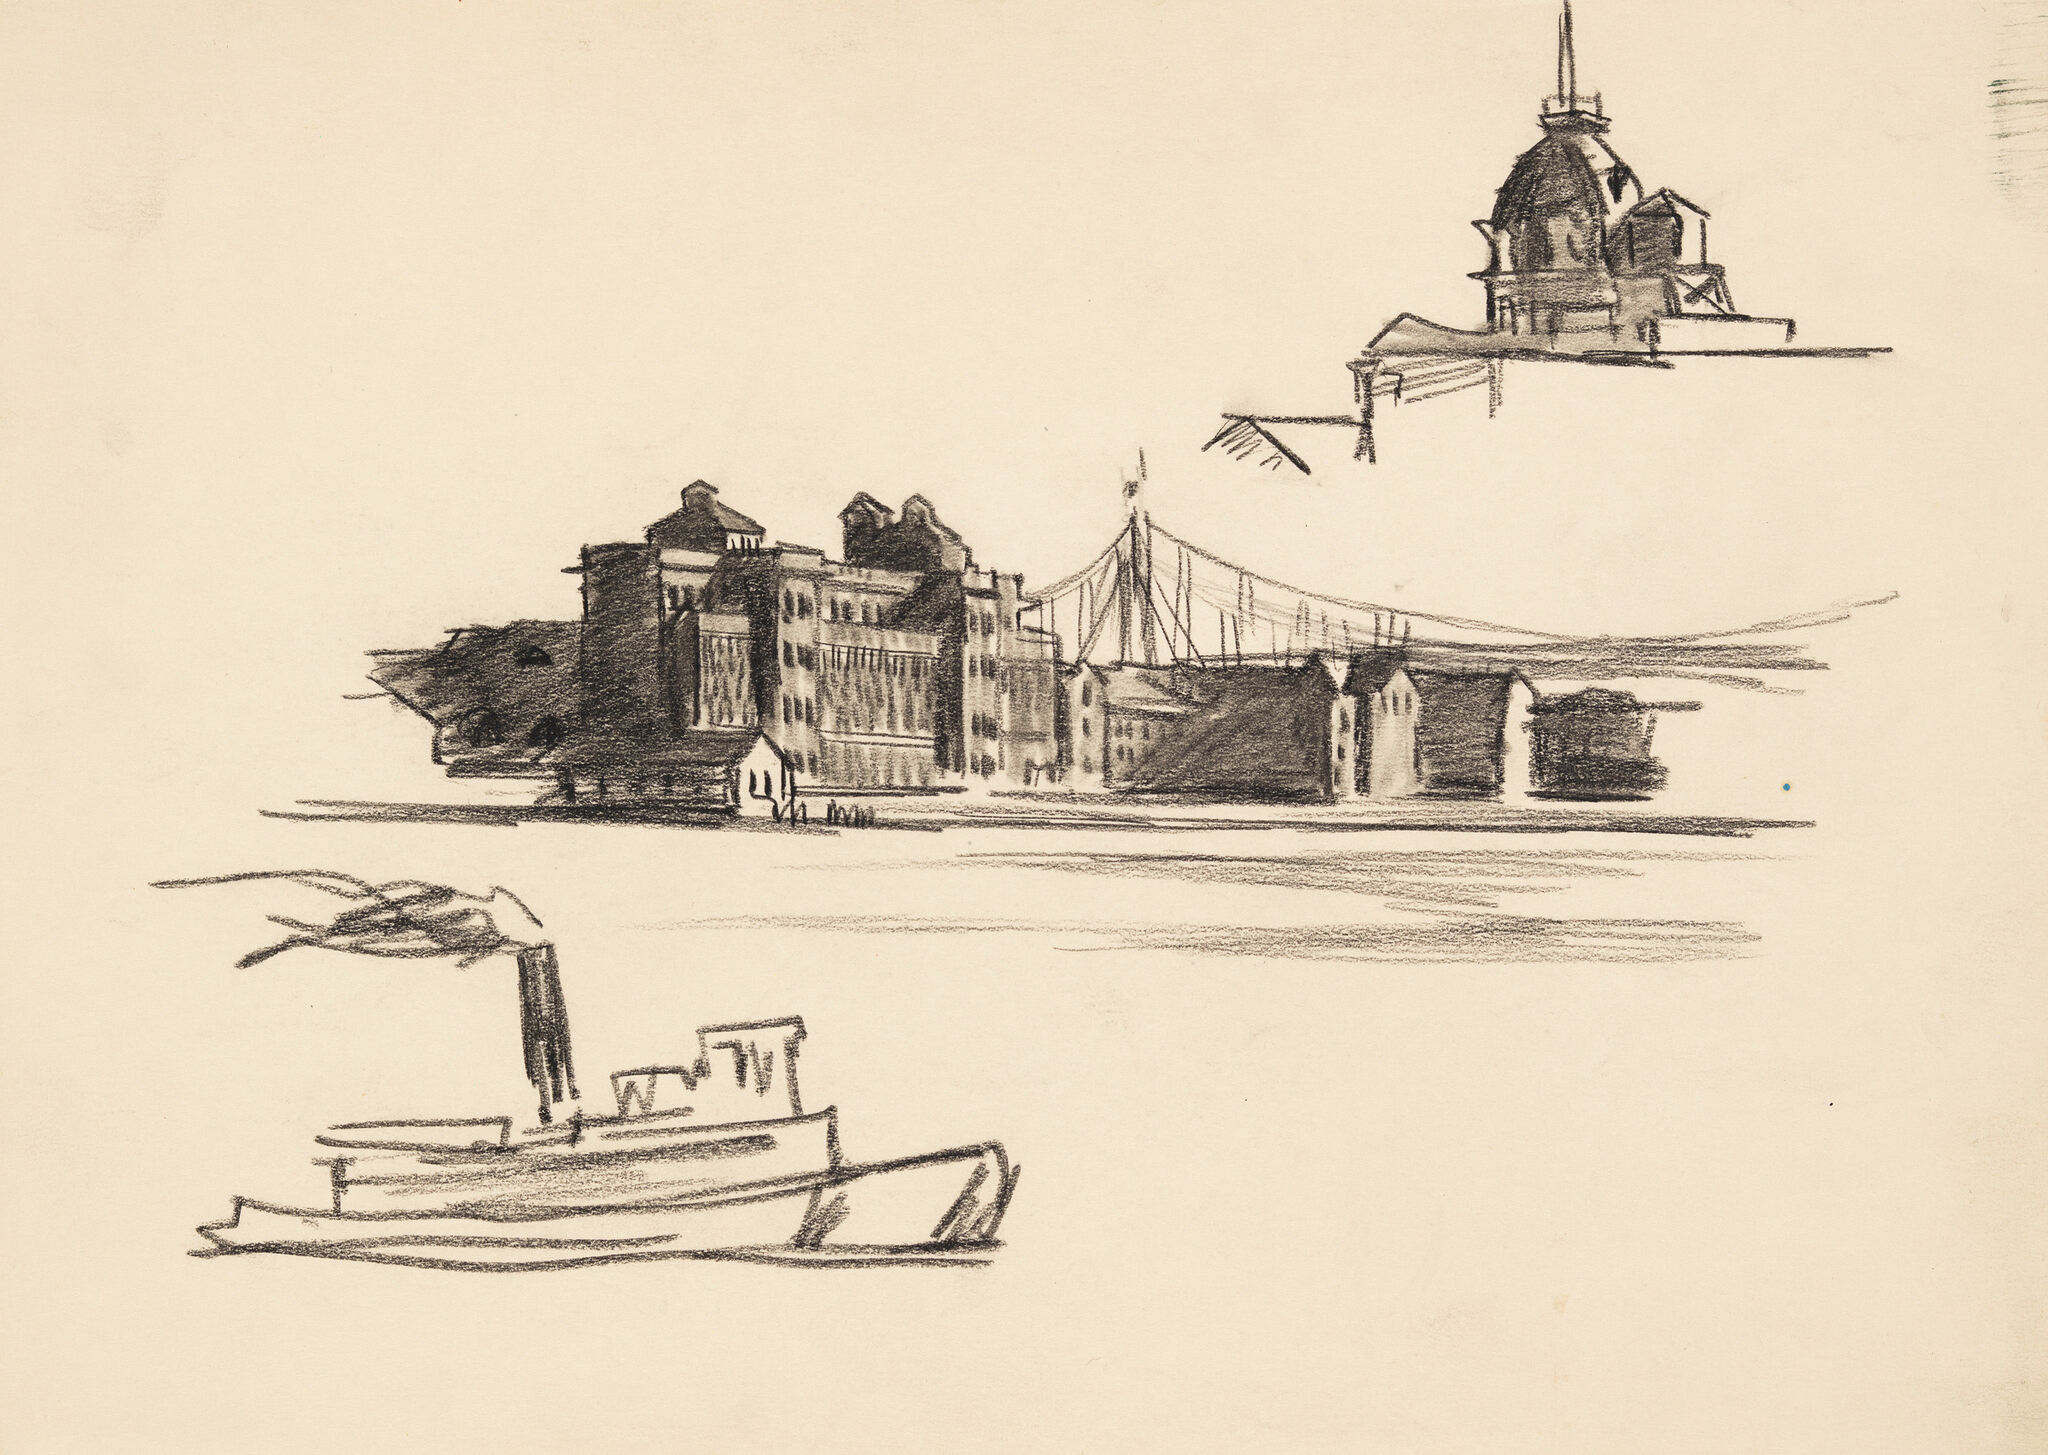 A sketch of a boat and buildings.